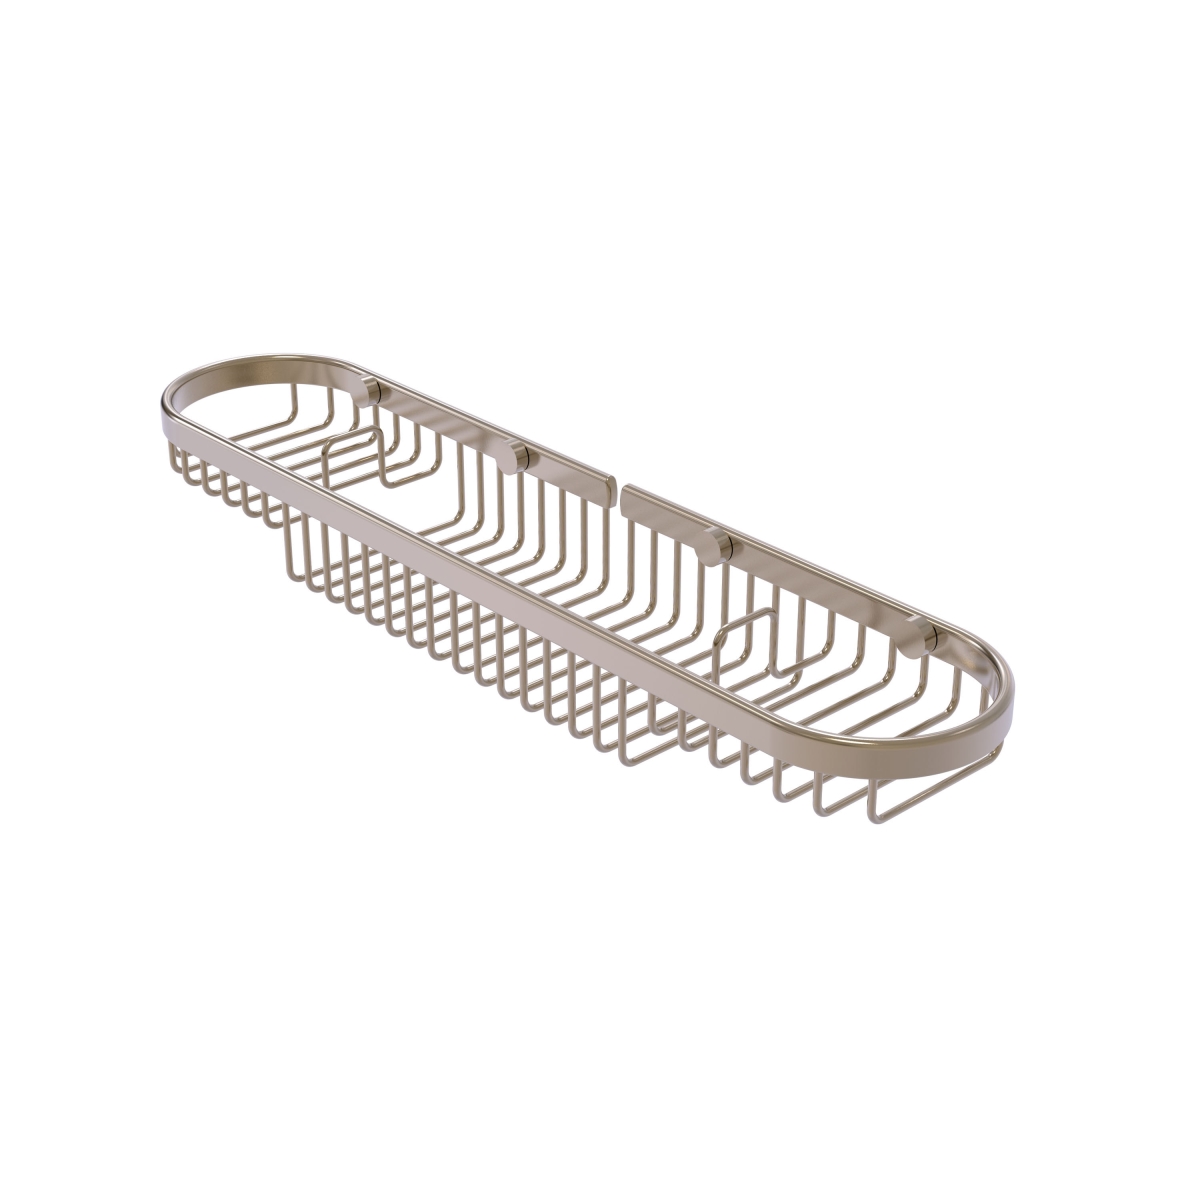 Picture of Allied Brass BSK-275LA-PEW Oval Combination Shower Basket, Antique Pewter